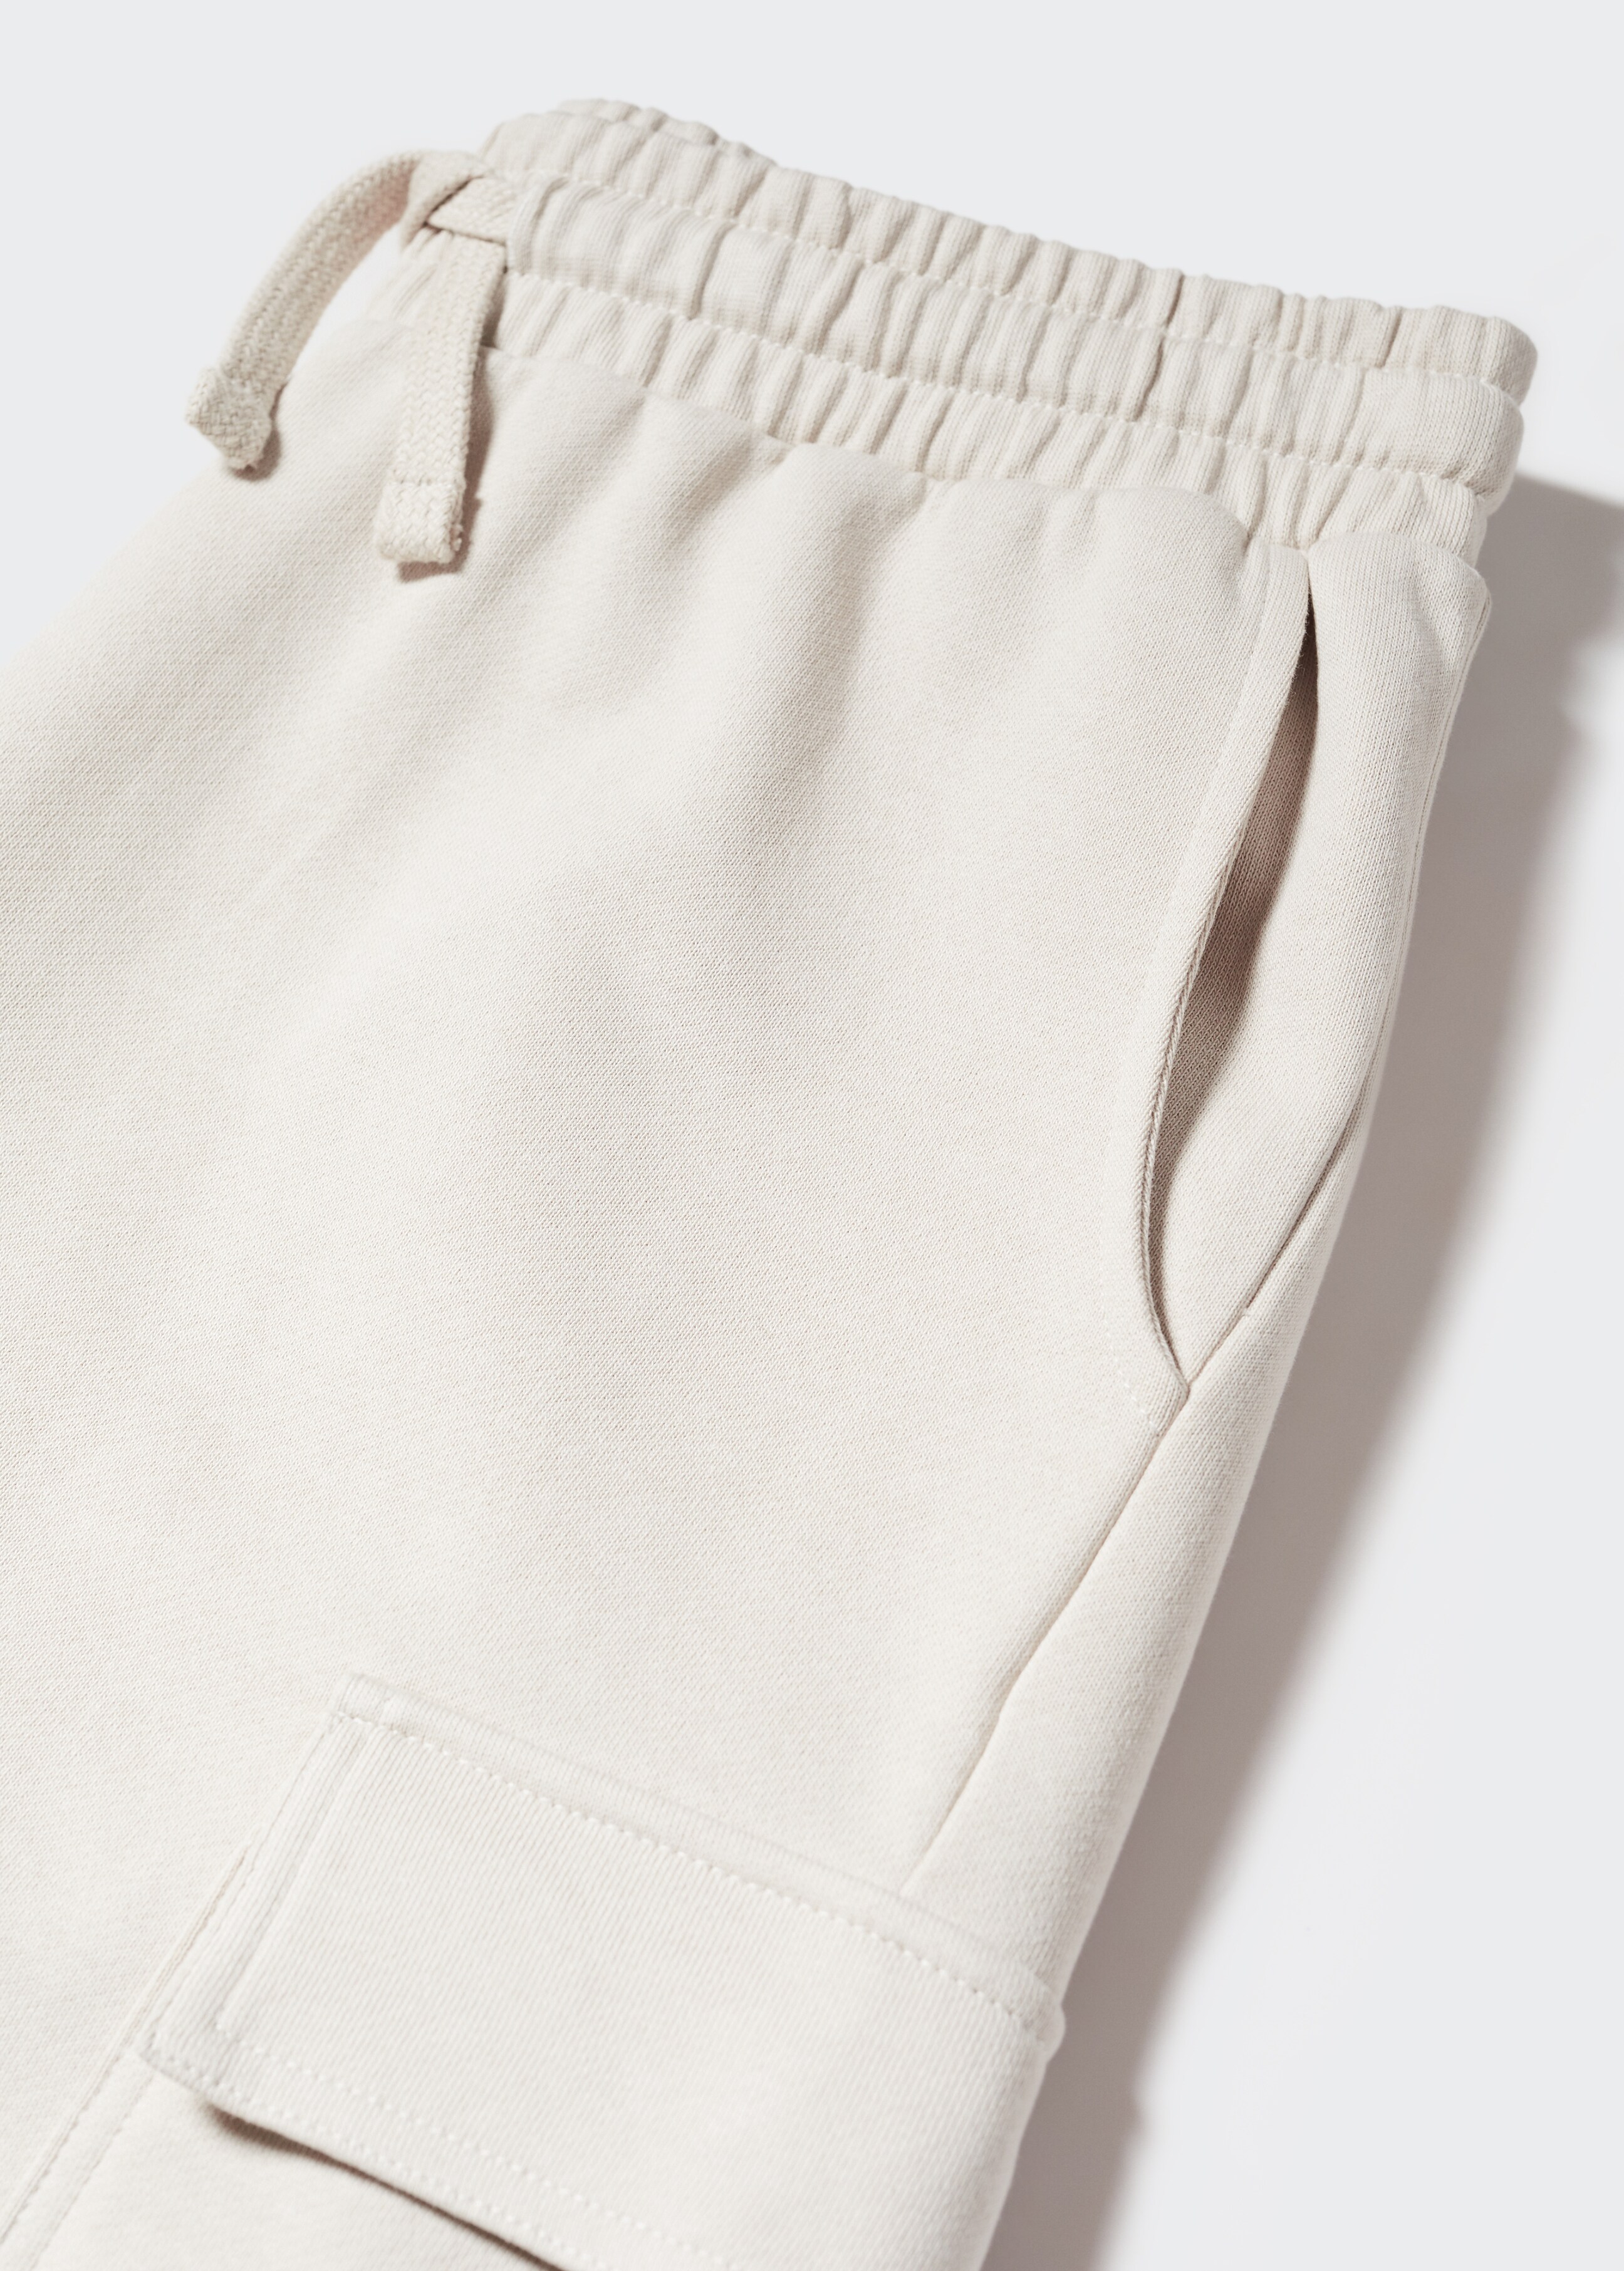 Cargo Bermuda shorts - Details of the article 8